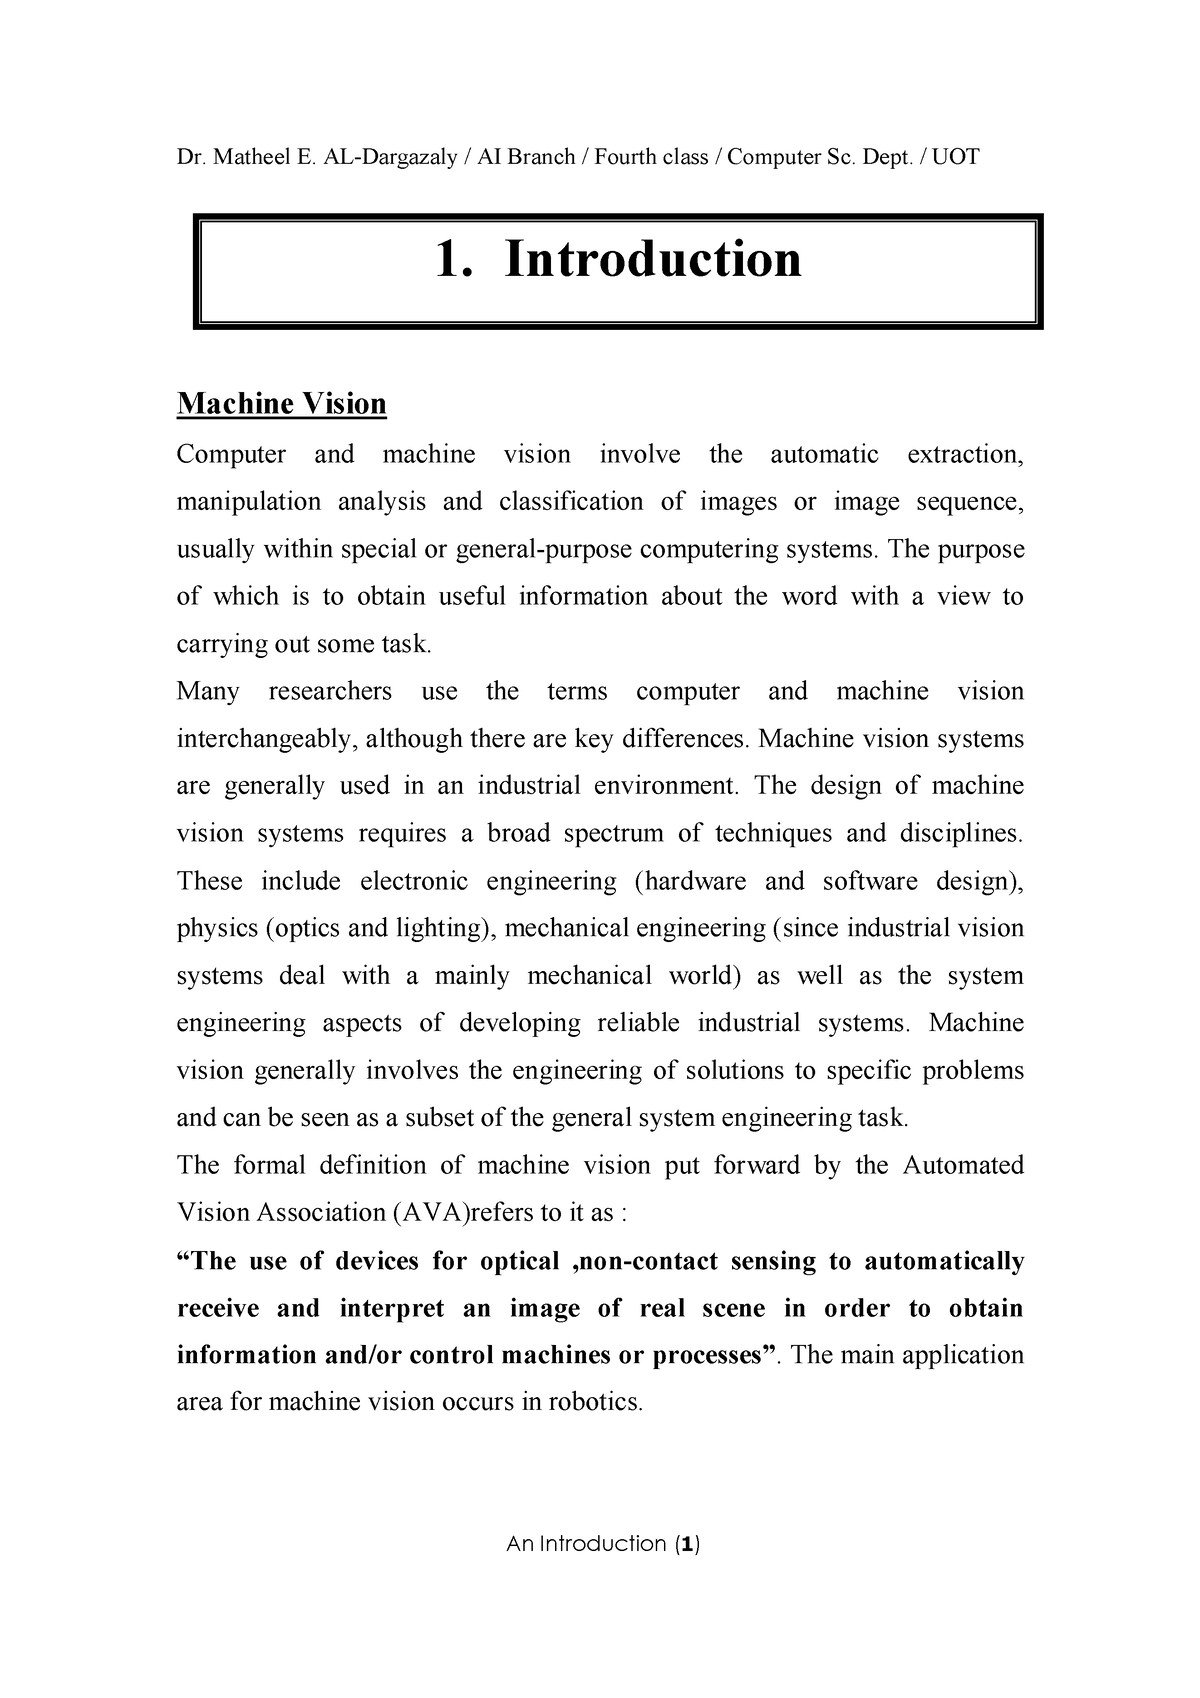 DIP ALL UNITS NOTES - 1. Introduction Machine Vision Computer and ...